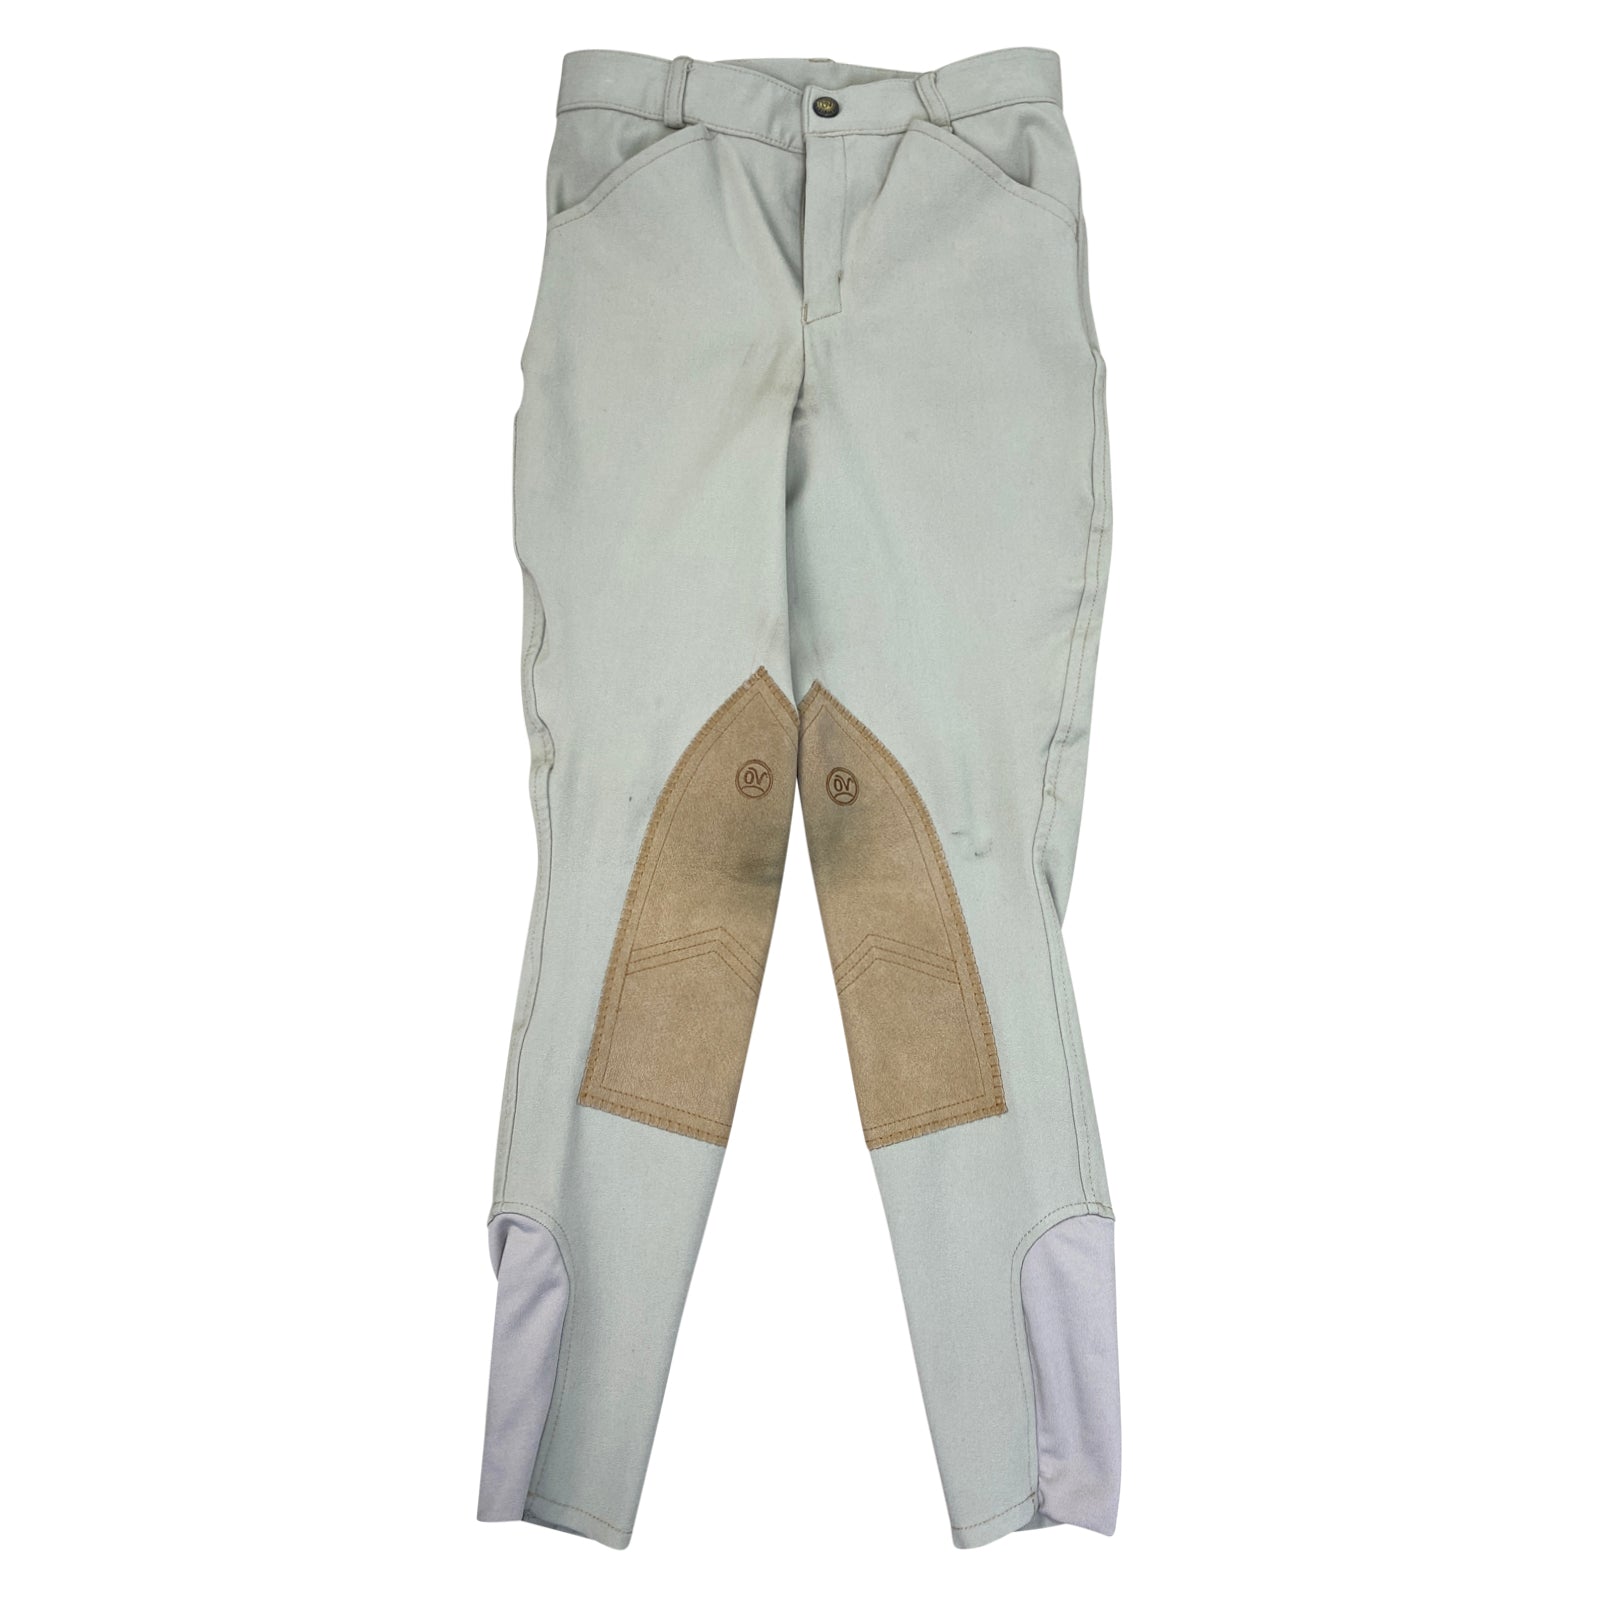 Ovation Celebrity Knee Patch Breeches in Tan